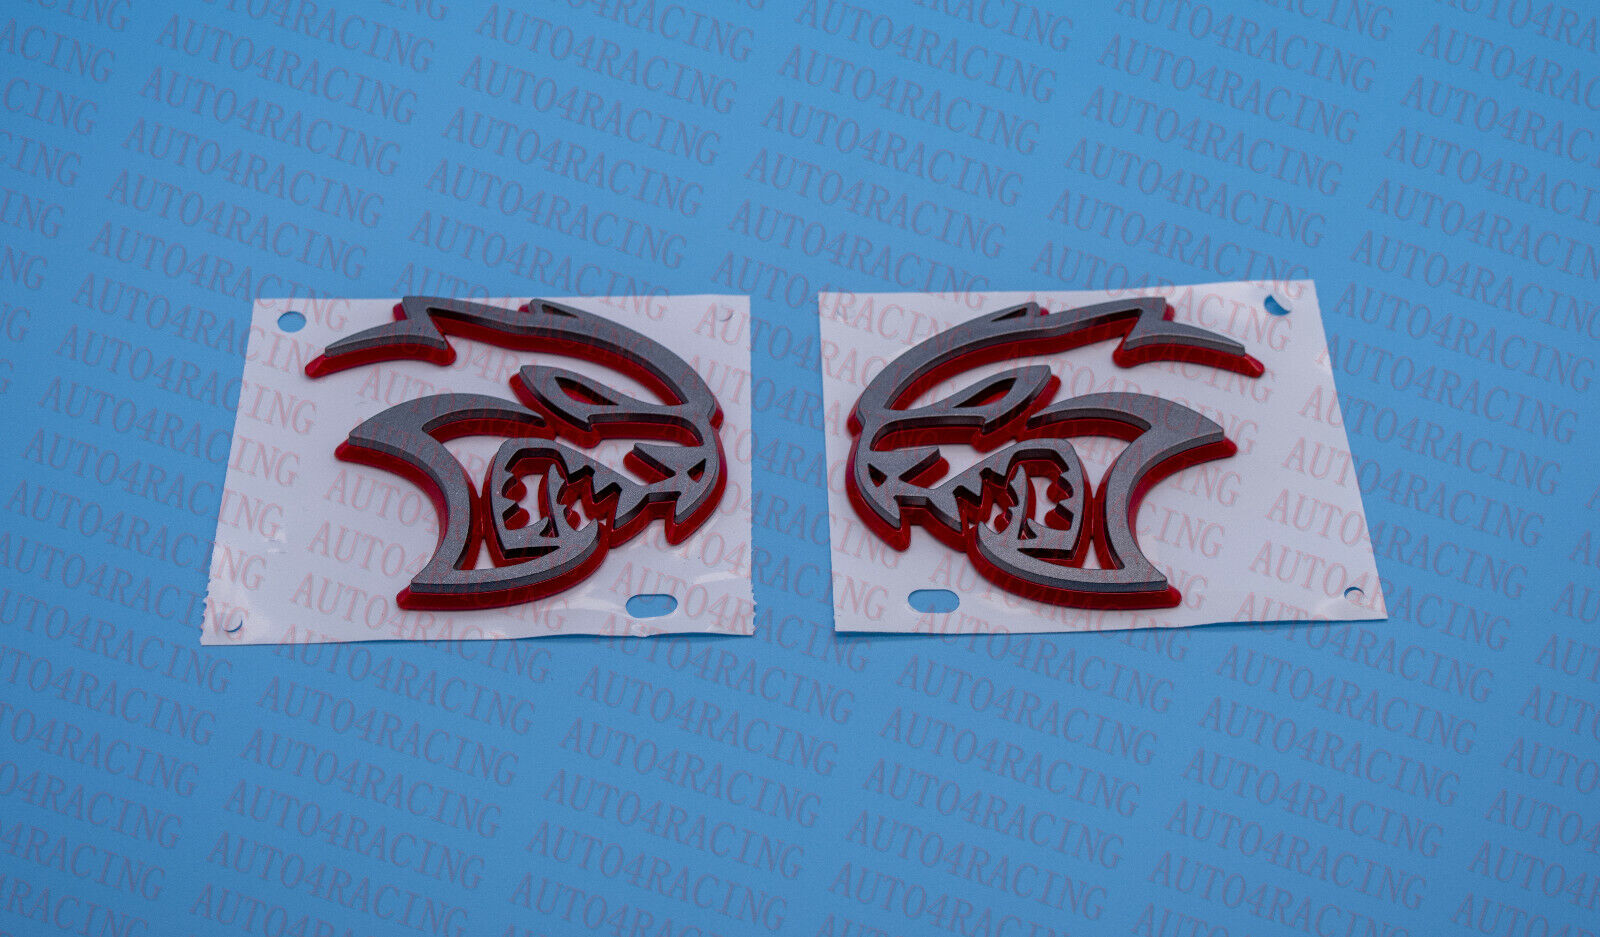 2020-2021 DODGE CHARGER Right & Left SRT Hellcat Fender Badge NEW Grey with Red